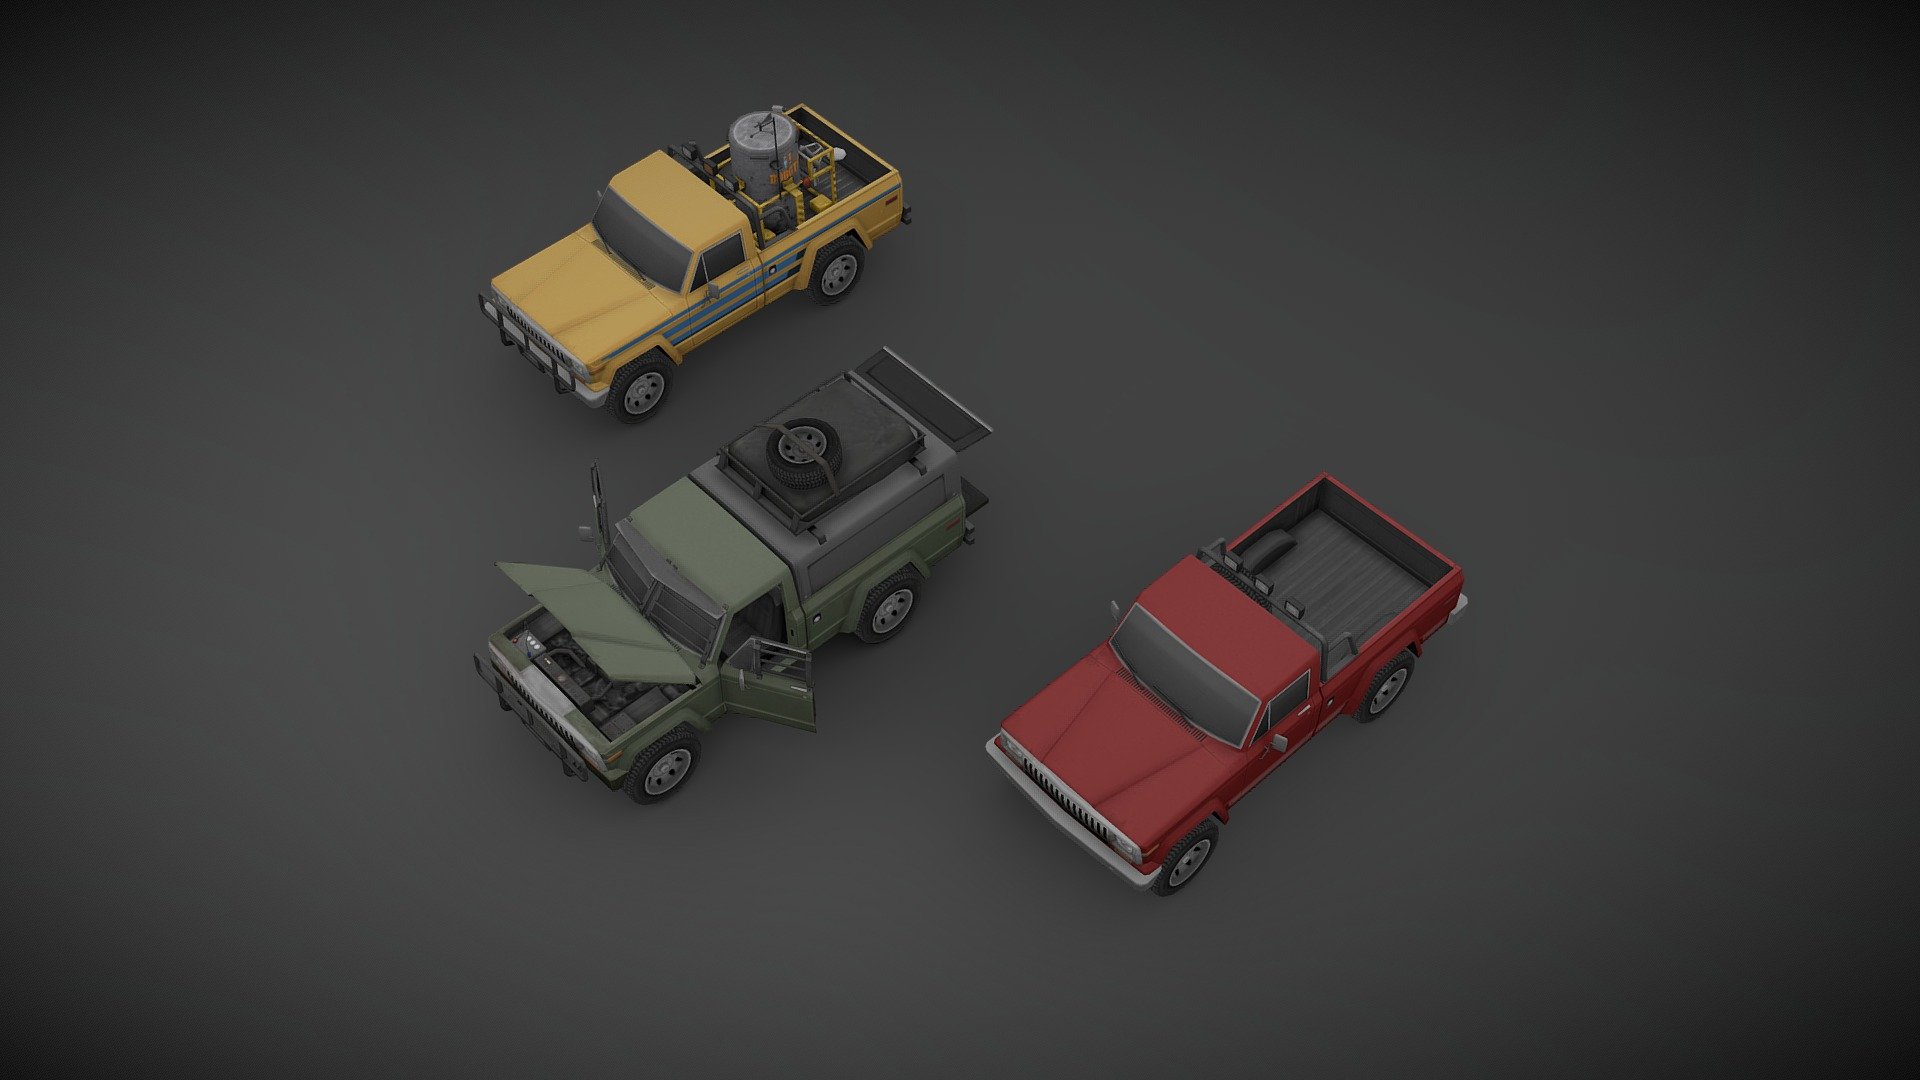 Showcase of a 1982 Jeep J10 featuring Mellow Yellow truck from the movie Twister, I’ve made for project ZOMBOID, low poly but with a high detail texture, optimized for game engine. This version is not a 100% true to the original since there are some compromises I’ve had to make to present it here.

You can find the actual version in project ZOMBOID STEAM Workshop 3d model